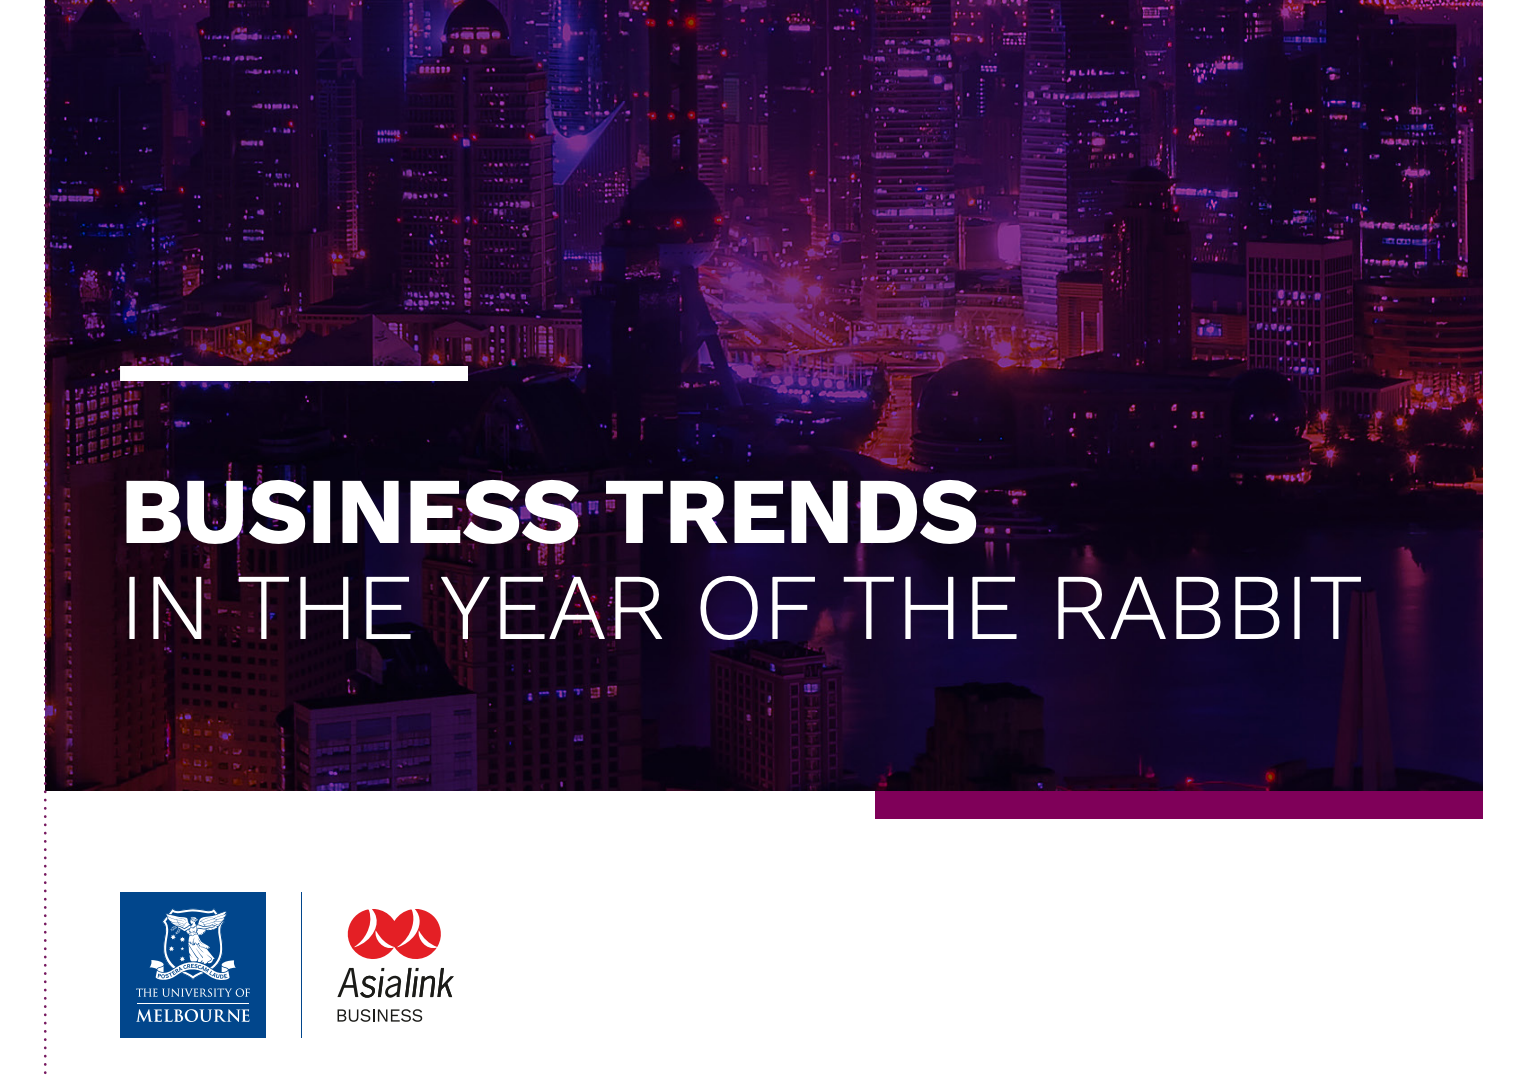 Overwatch Contribution To Asialink's Business Trends for 2023